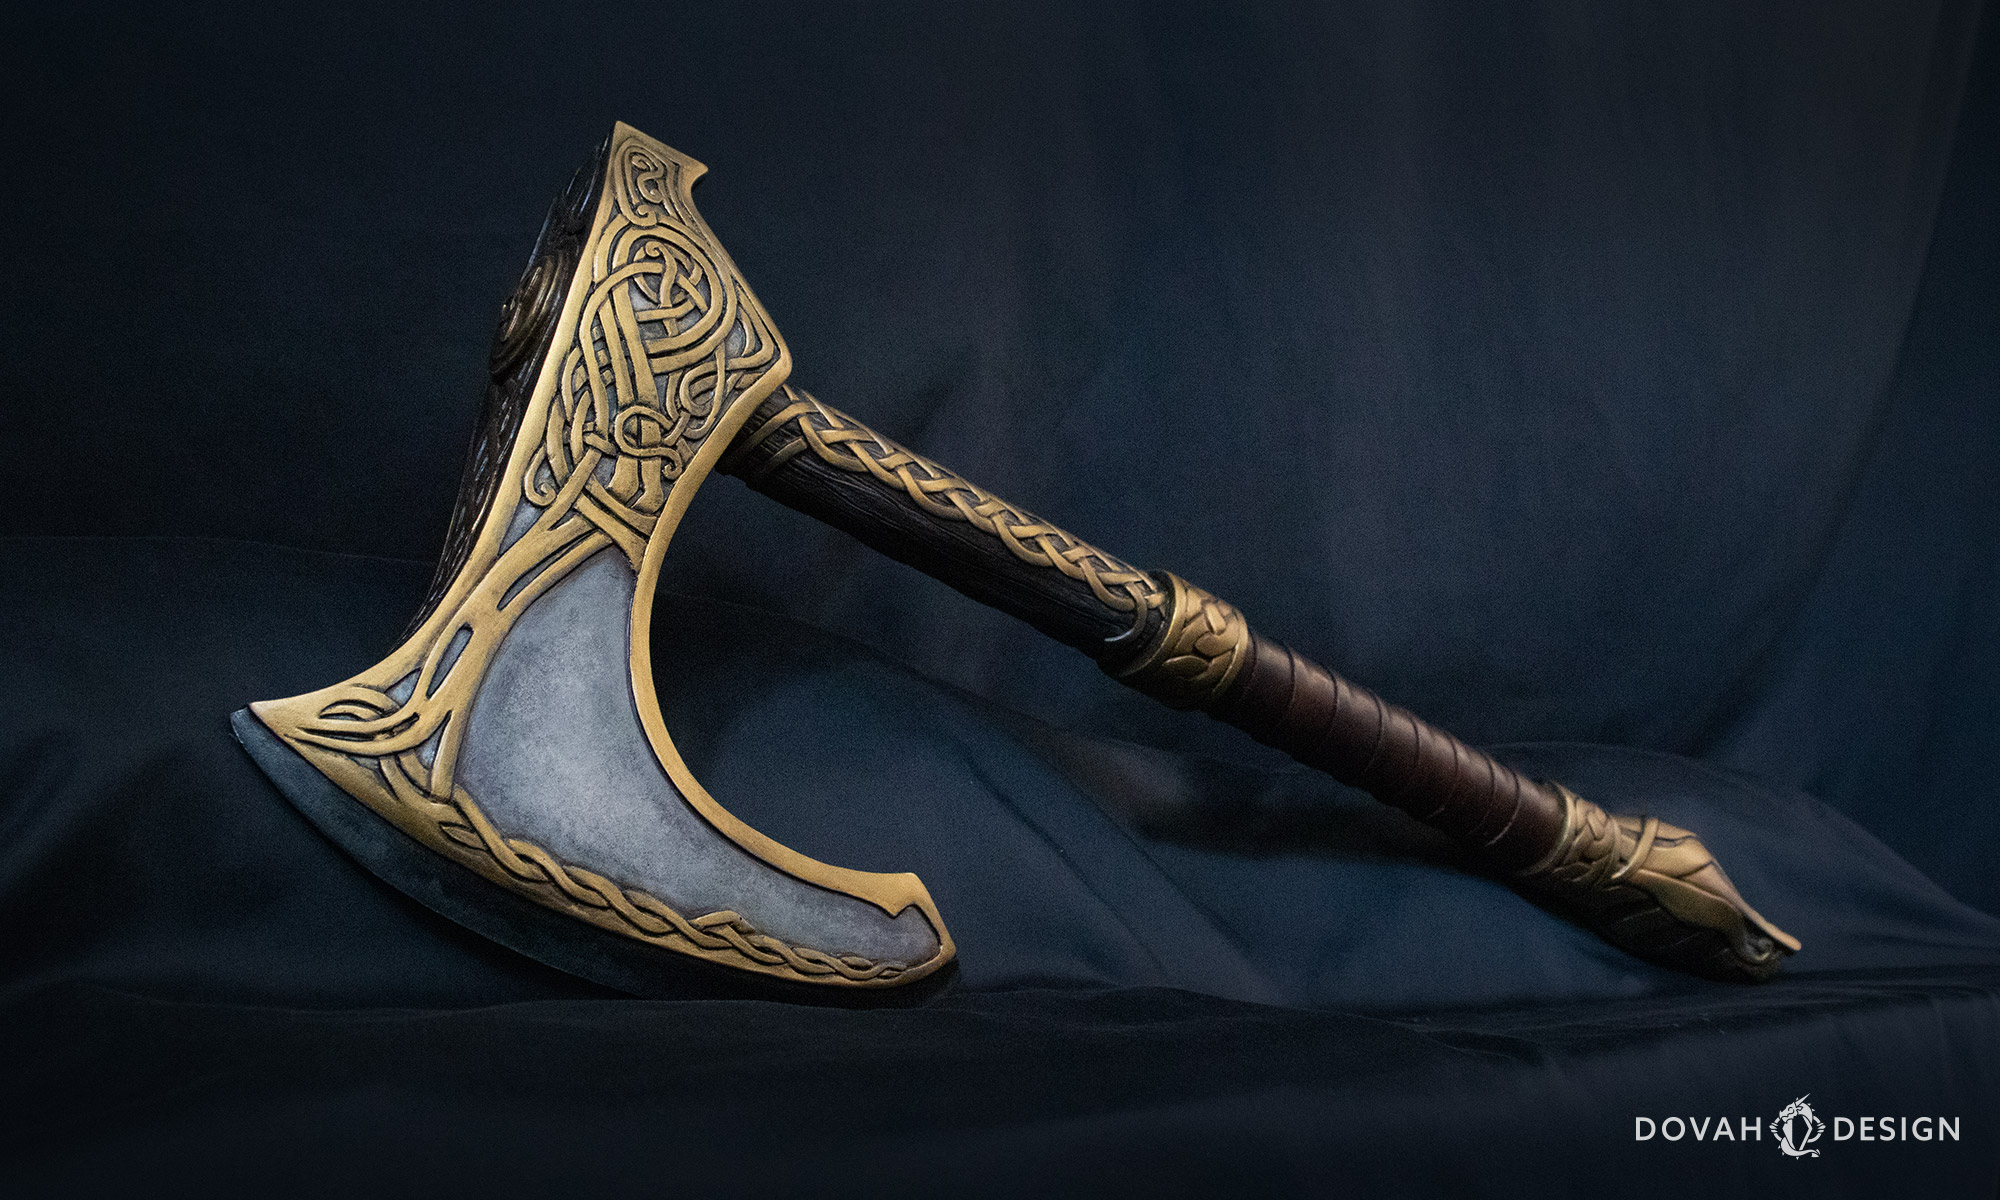 Angled view of Eivor's Raider Axe replica prop from Assassin's Creed: Valhalla, blade with golden knotwork detail in focus in the foreground, with knotwork hilt and handle seen farther in the distance in front of a black backdrop.